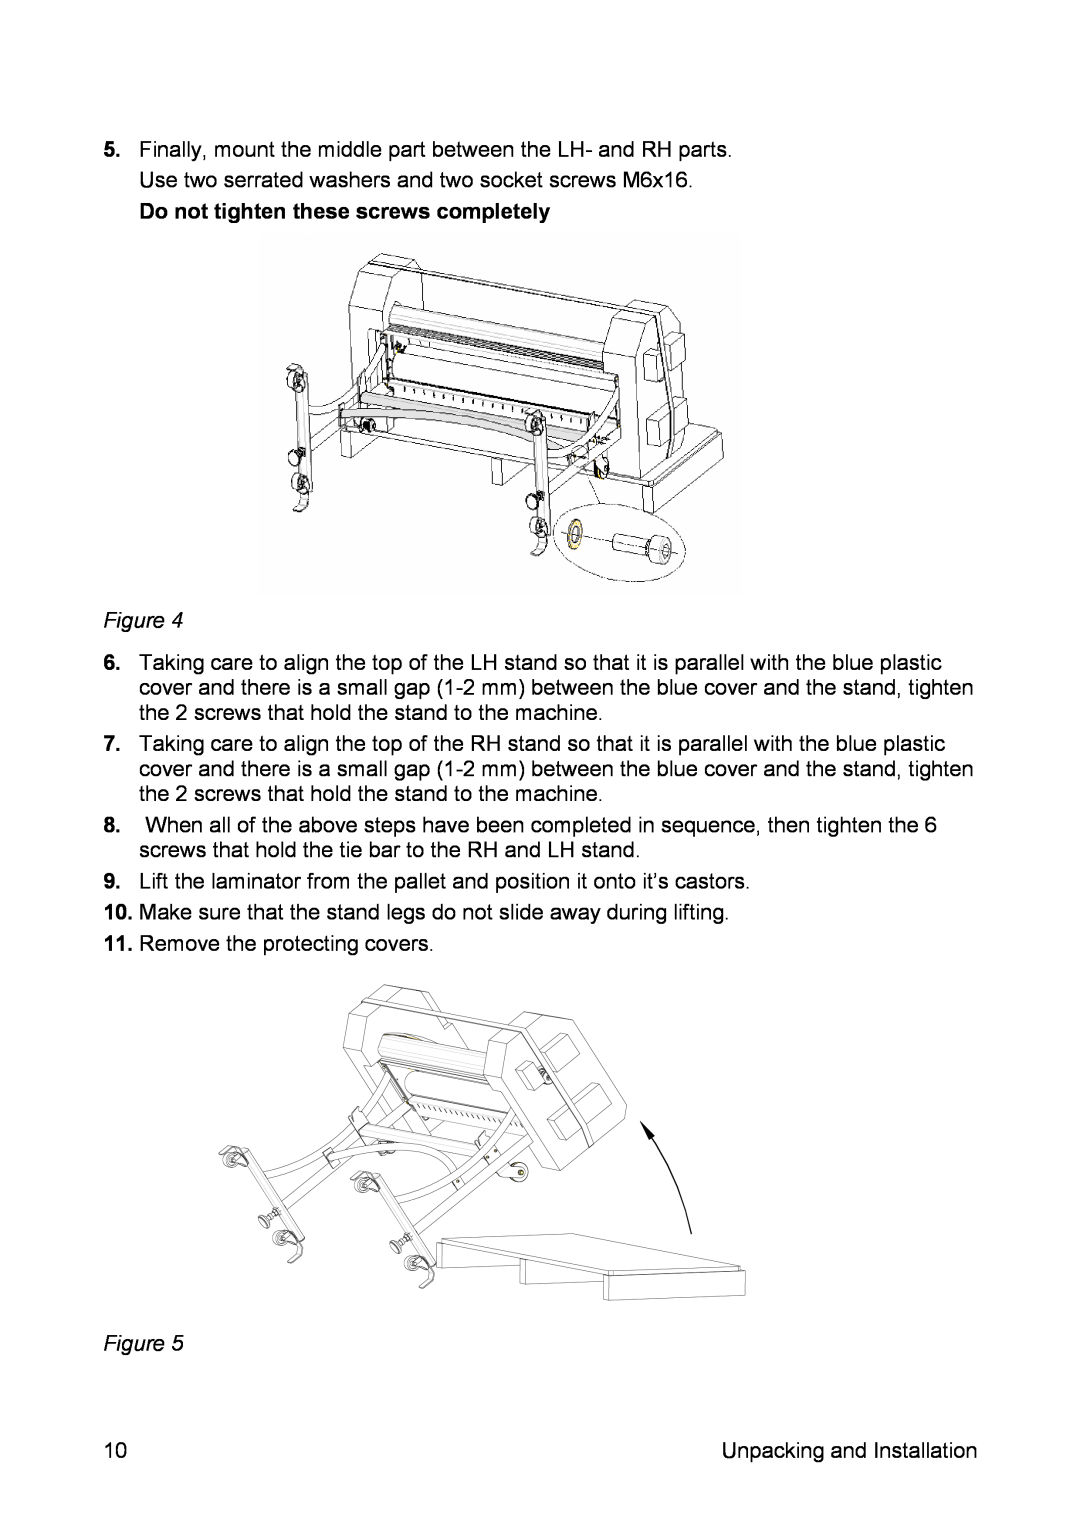 SEAL 44/62 user manual Make sure that the stand legs do not slide away during lifting, Remove the protecting covers 